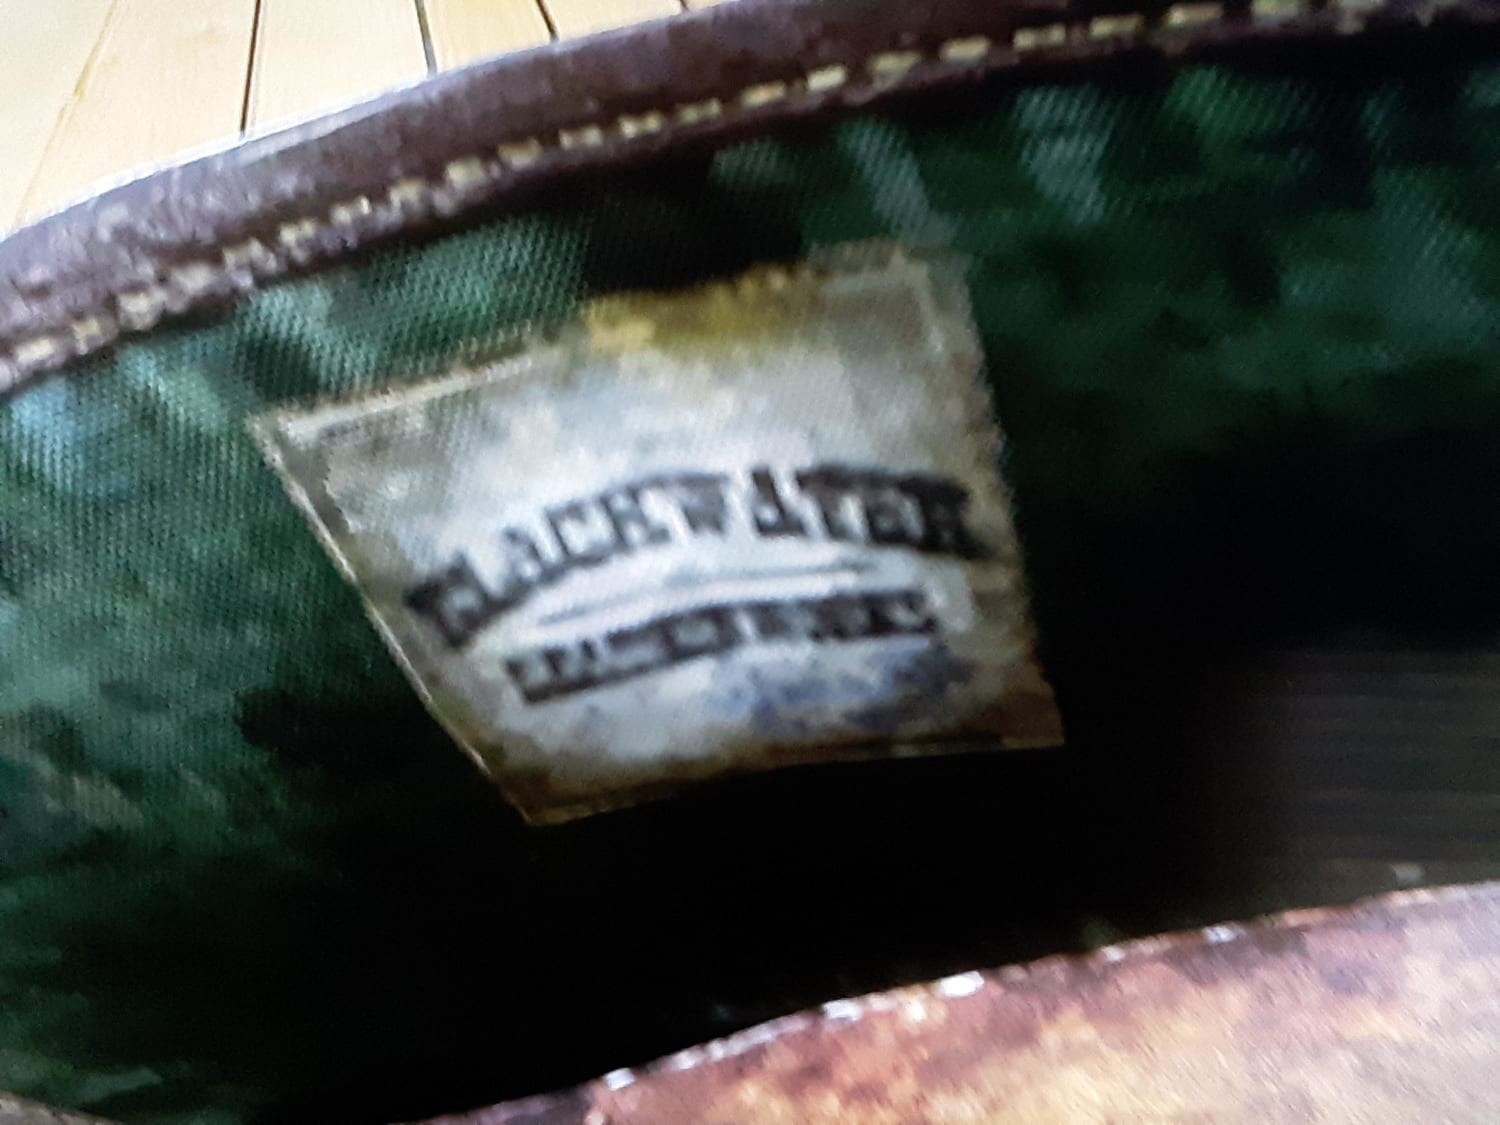 So apparently John got his satchel from Blackwater. I still can't believe the level of detail in this game.